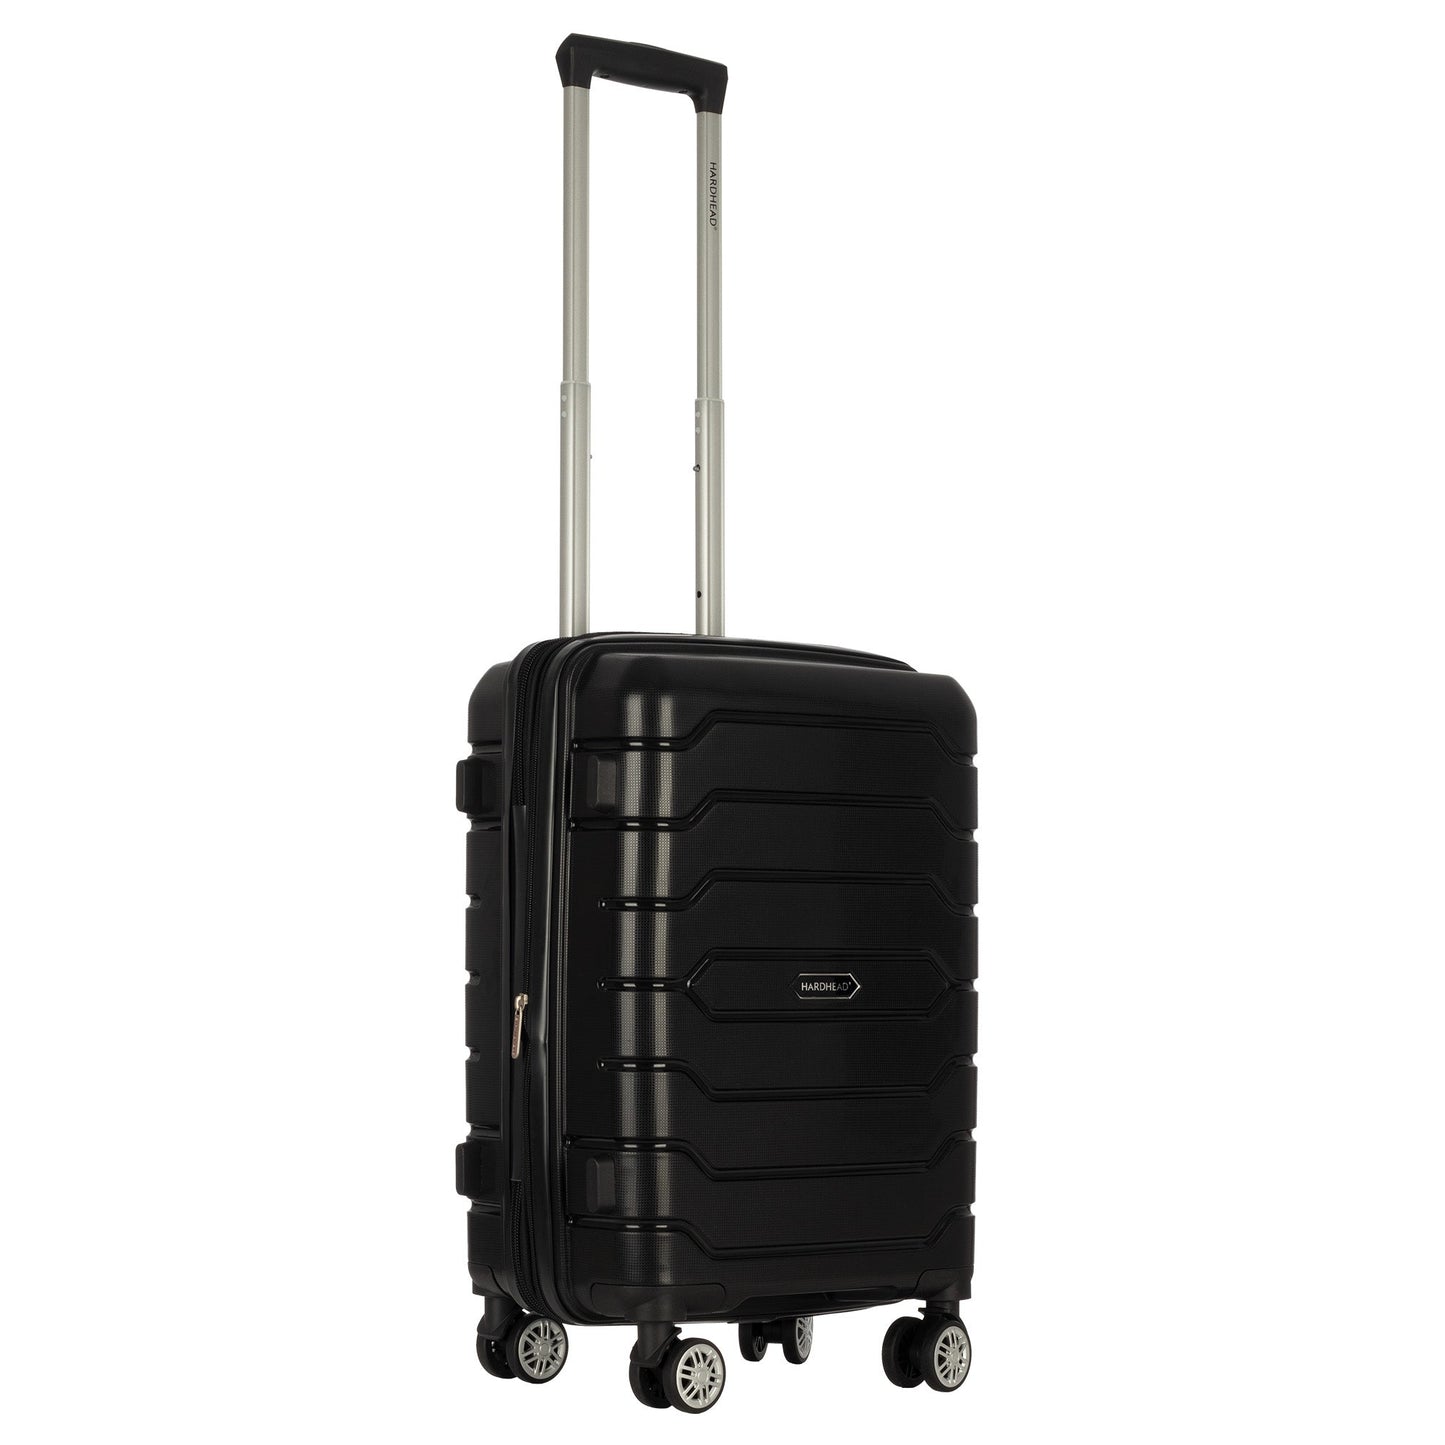 Ian collection luggage black (20") Suitcase Lock Spinner